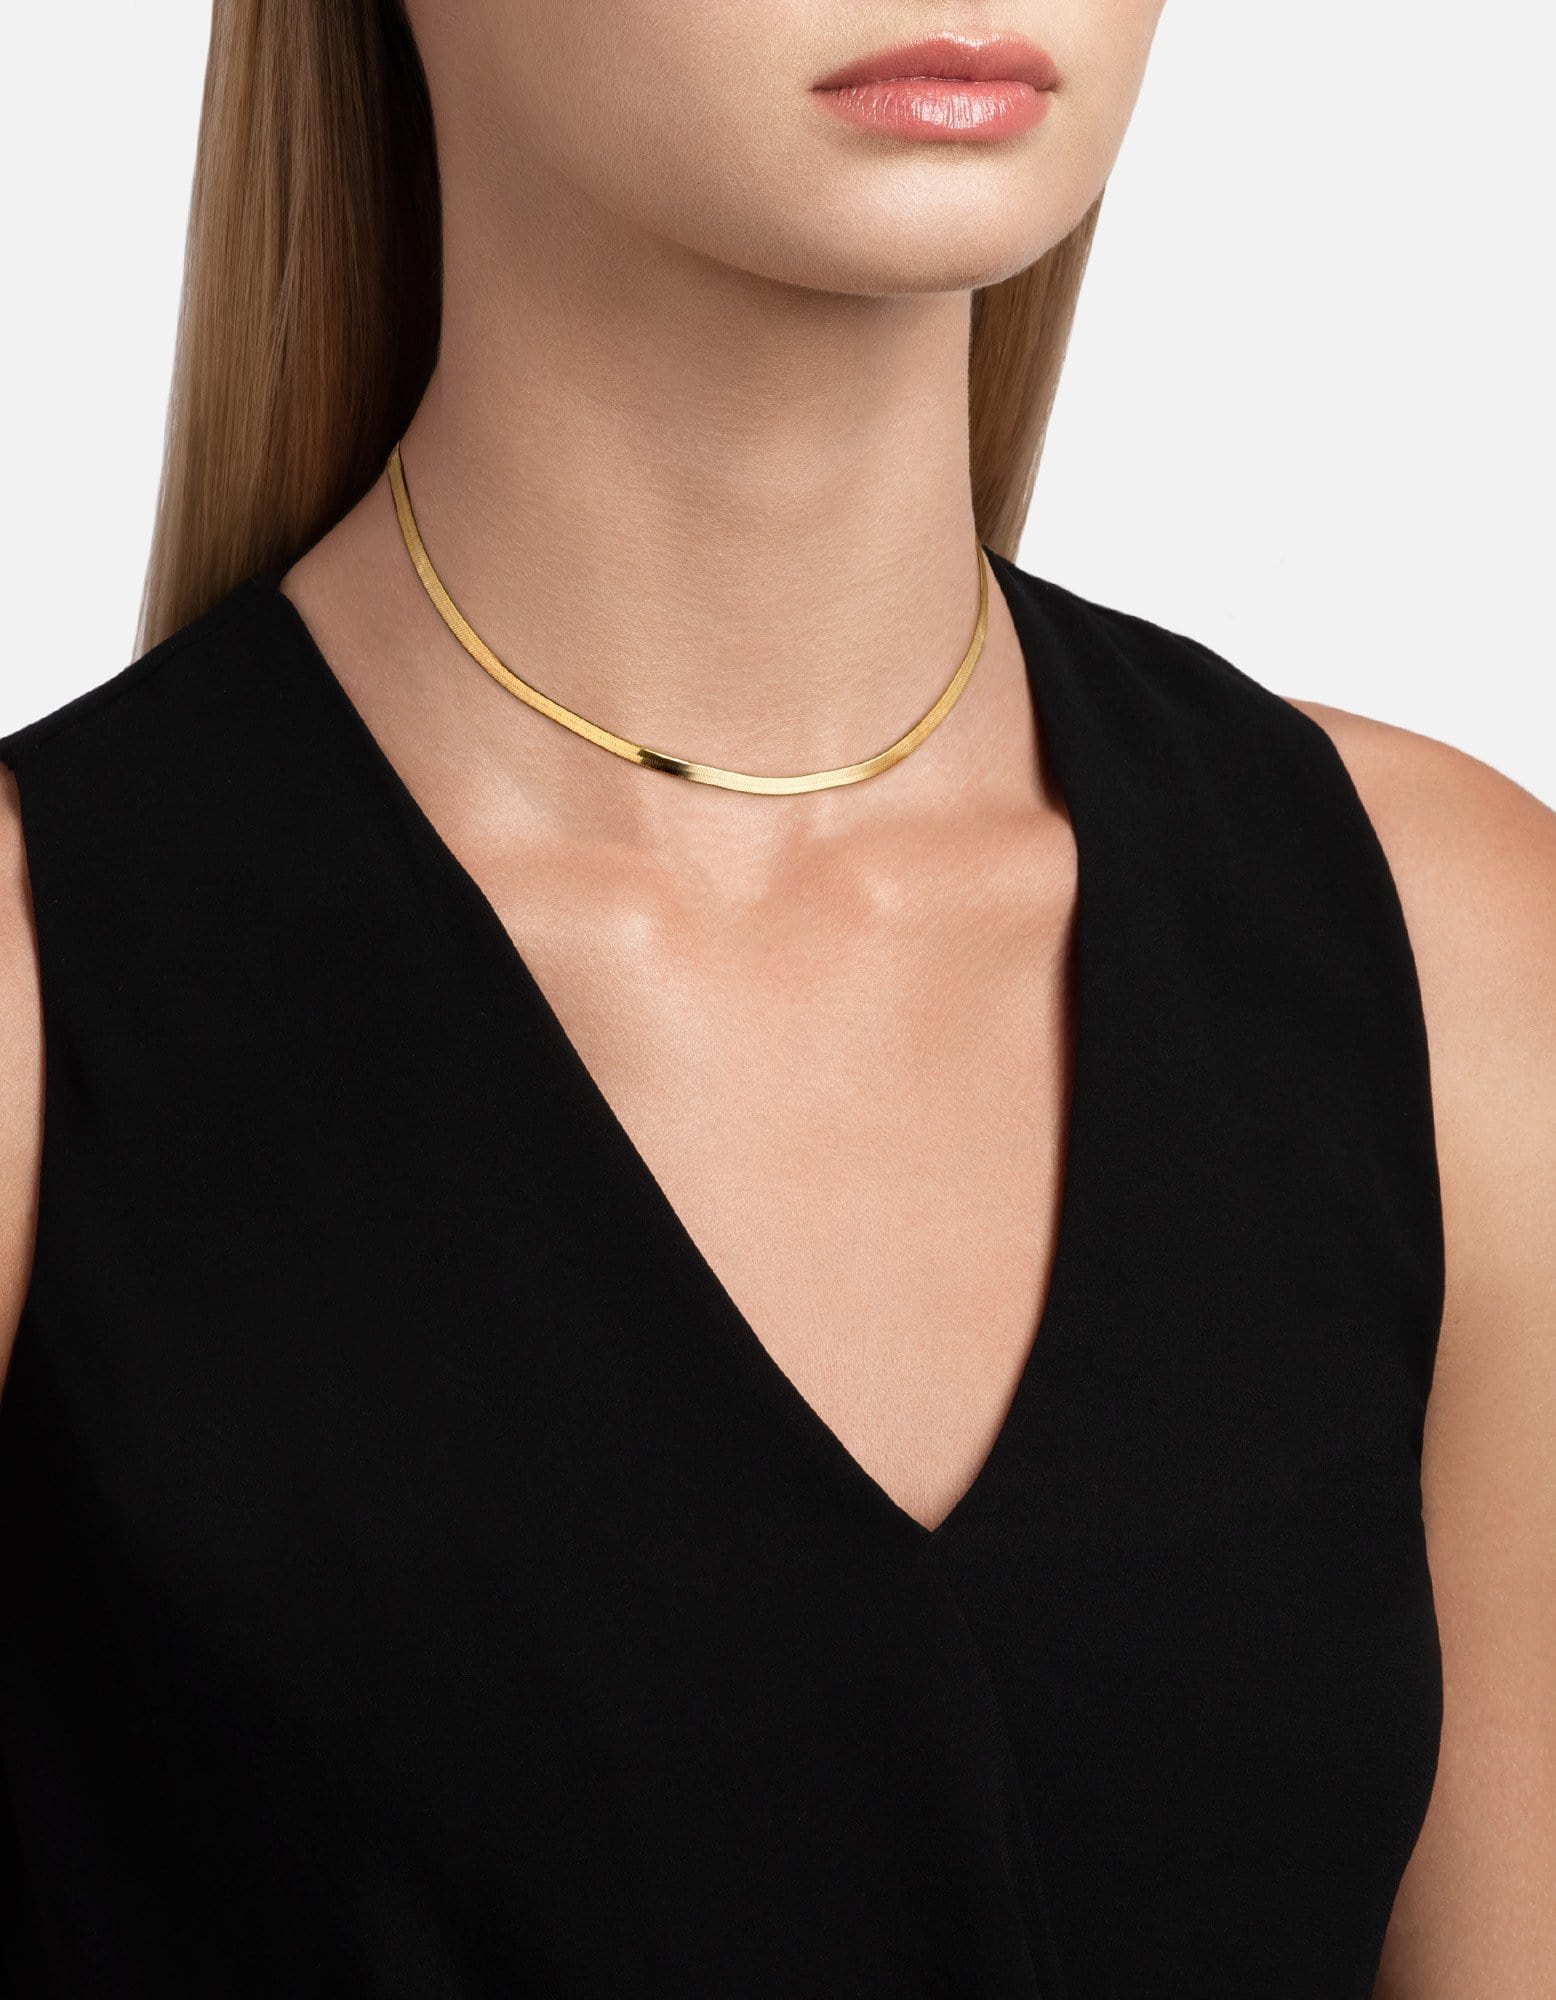 15 Gold Initial Necklaces To Elevate Your Style With | Classy Women  Collection